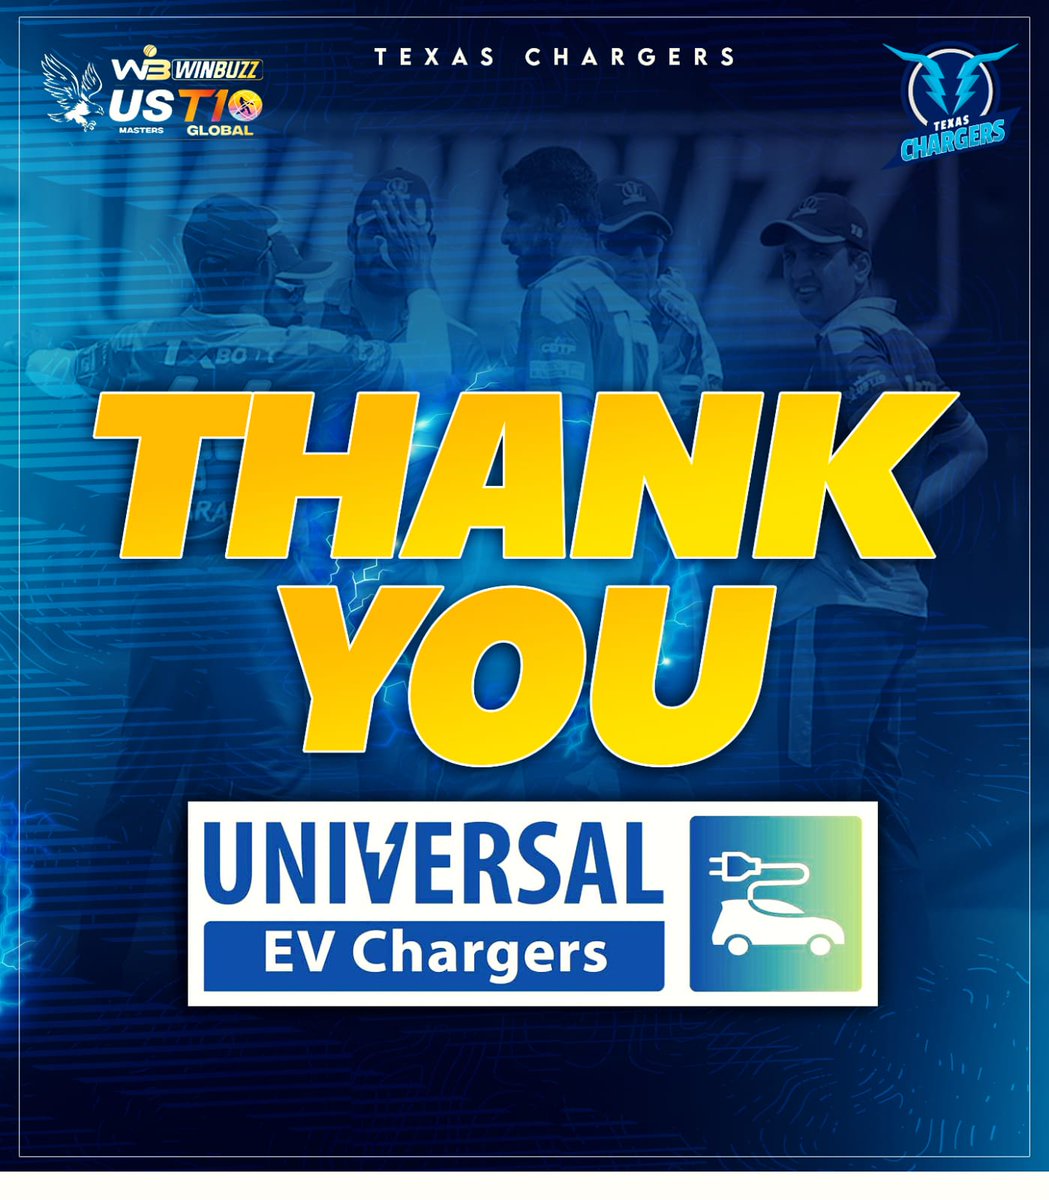 Thanks to our amazing associate sponsor, Universal EV Chargers ⚡️ We're thrilled to have them as part of the Texas Chargers team 👌🏏 #TexasChargers #USMastersT10 #USACricket #Cricket #ChargingToVictory